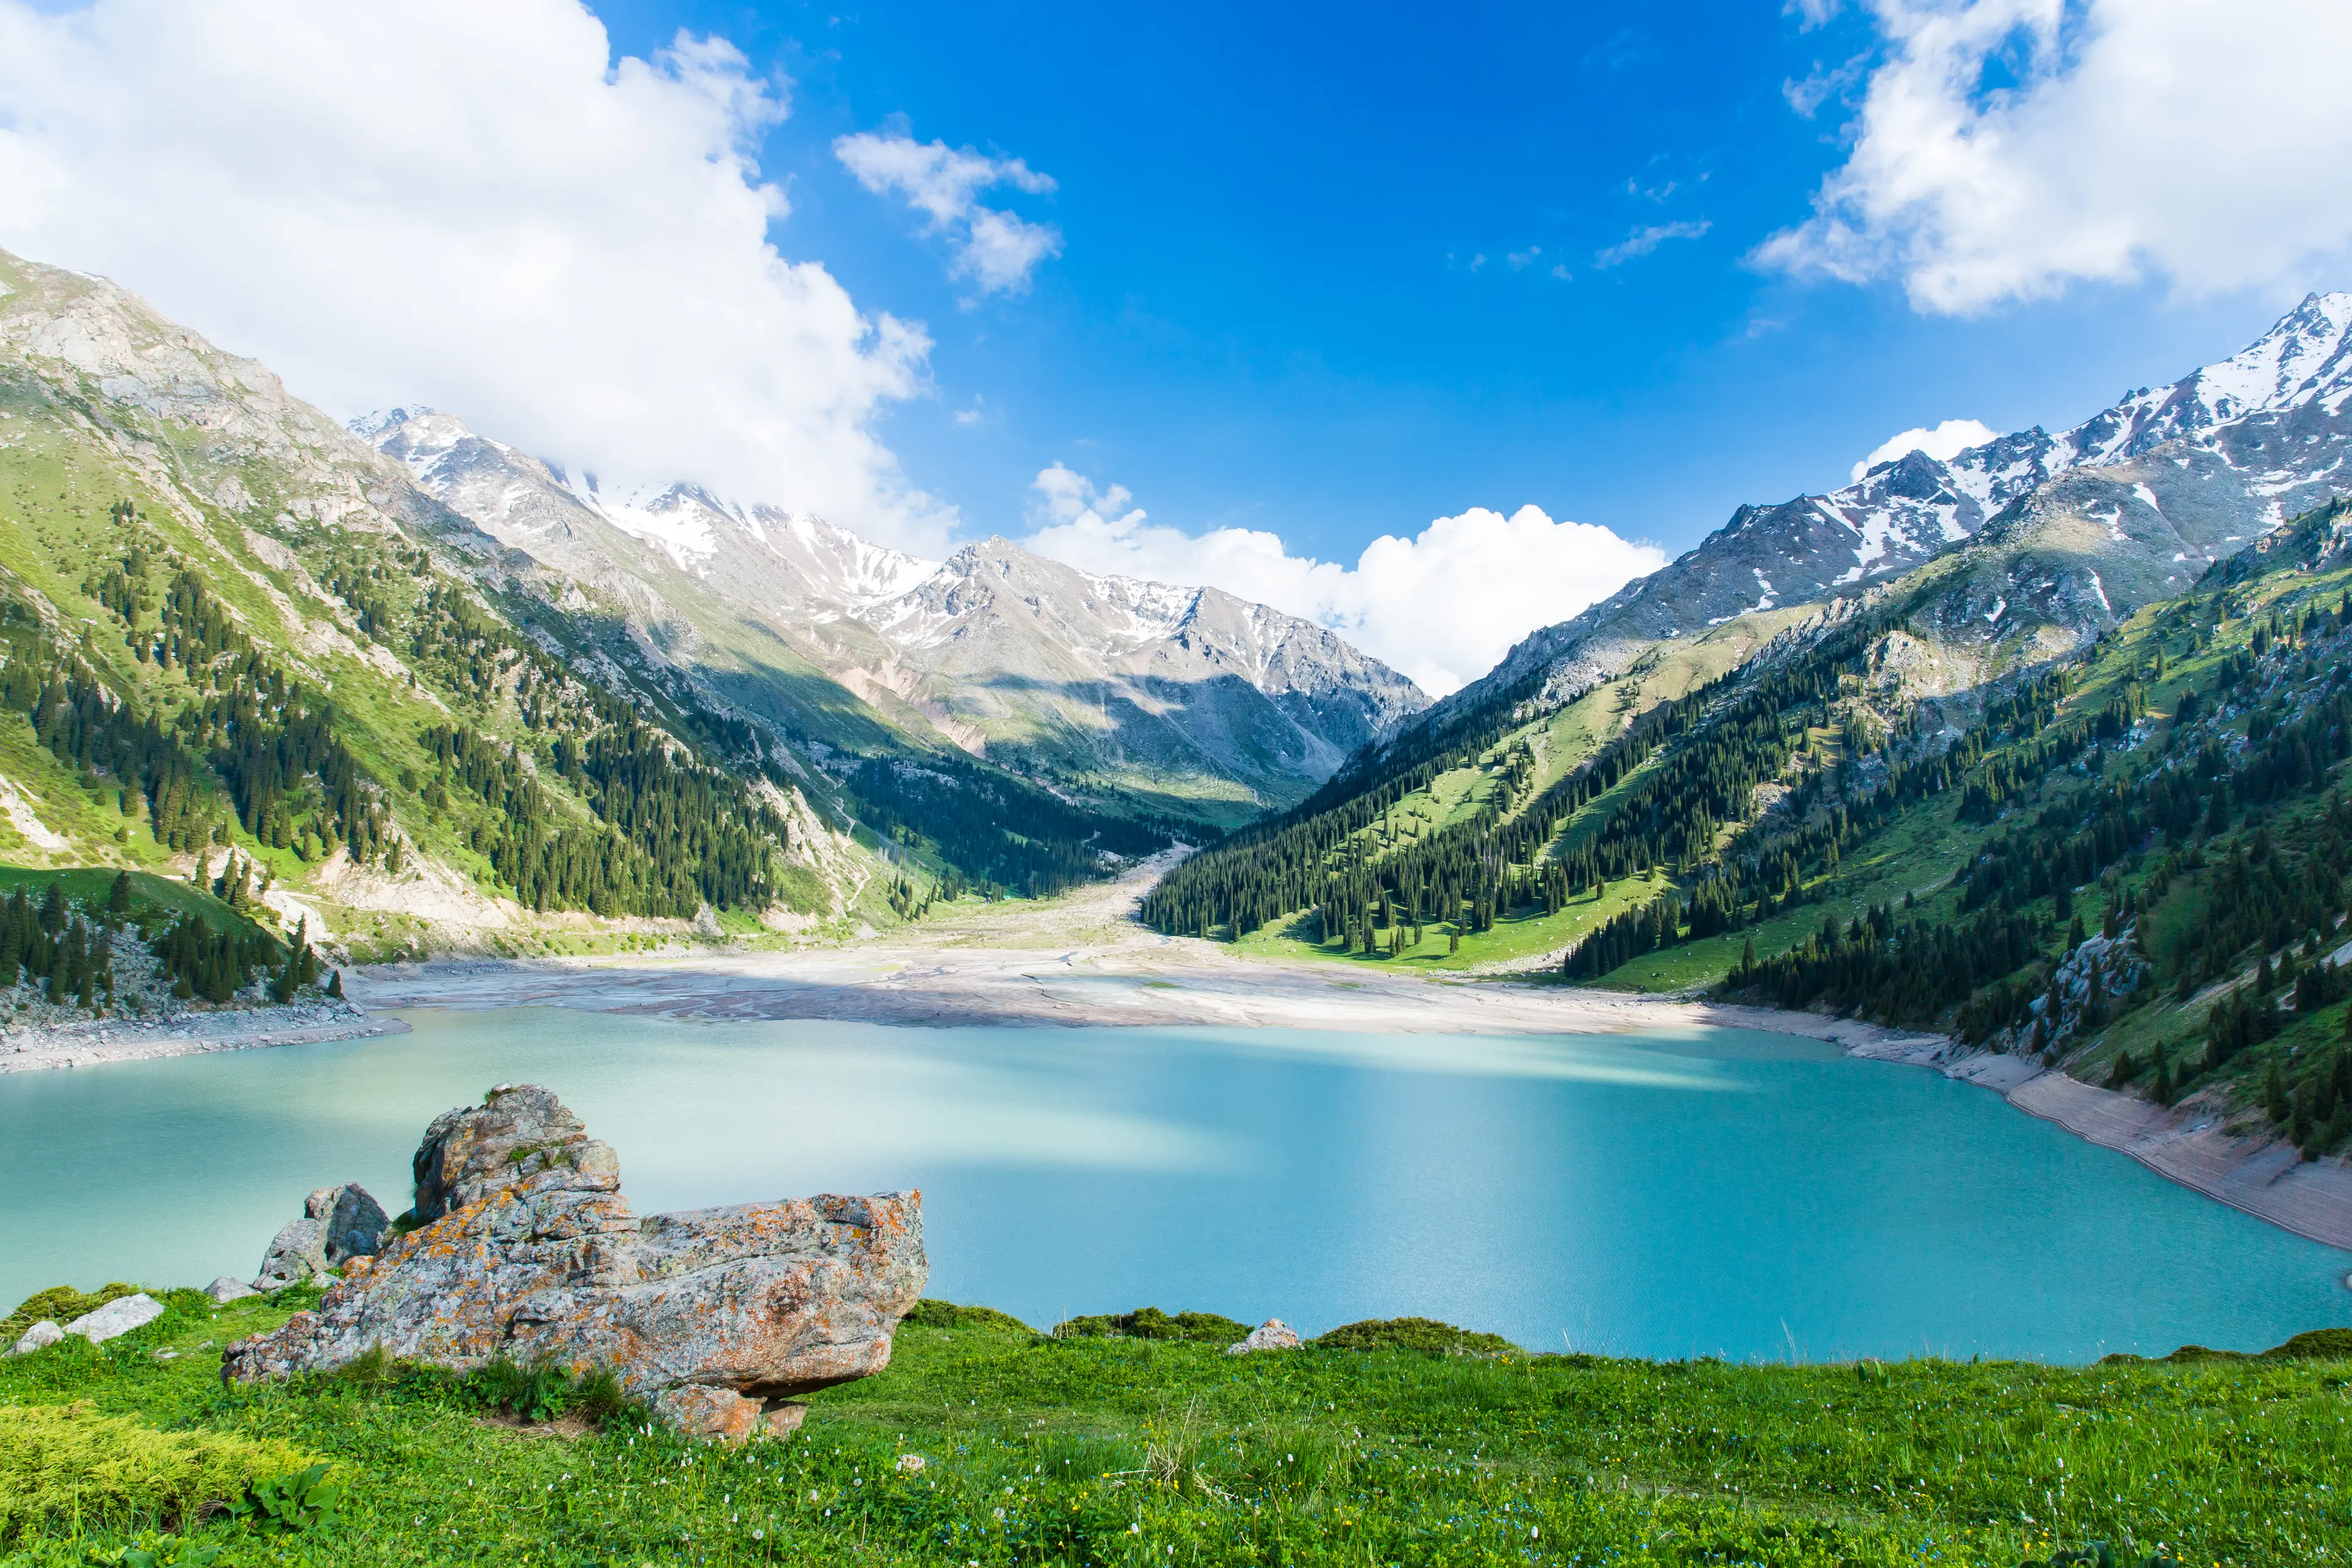 4-Day Relaxing and Sightseeing Trip for Couples in Almaty, Kazakhstan